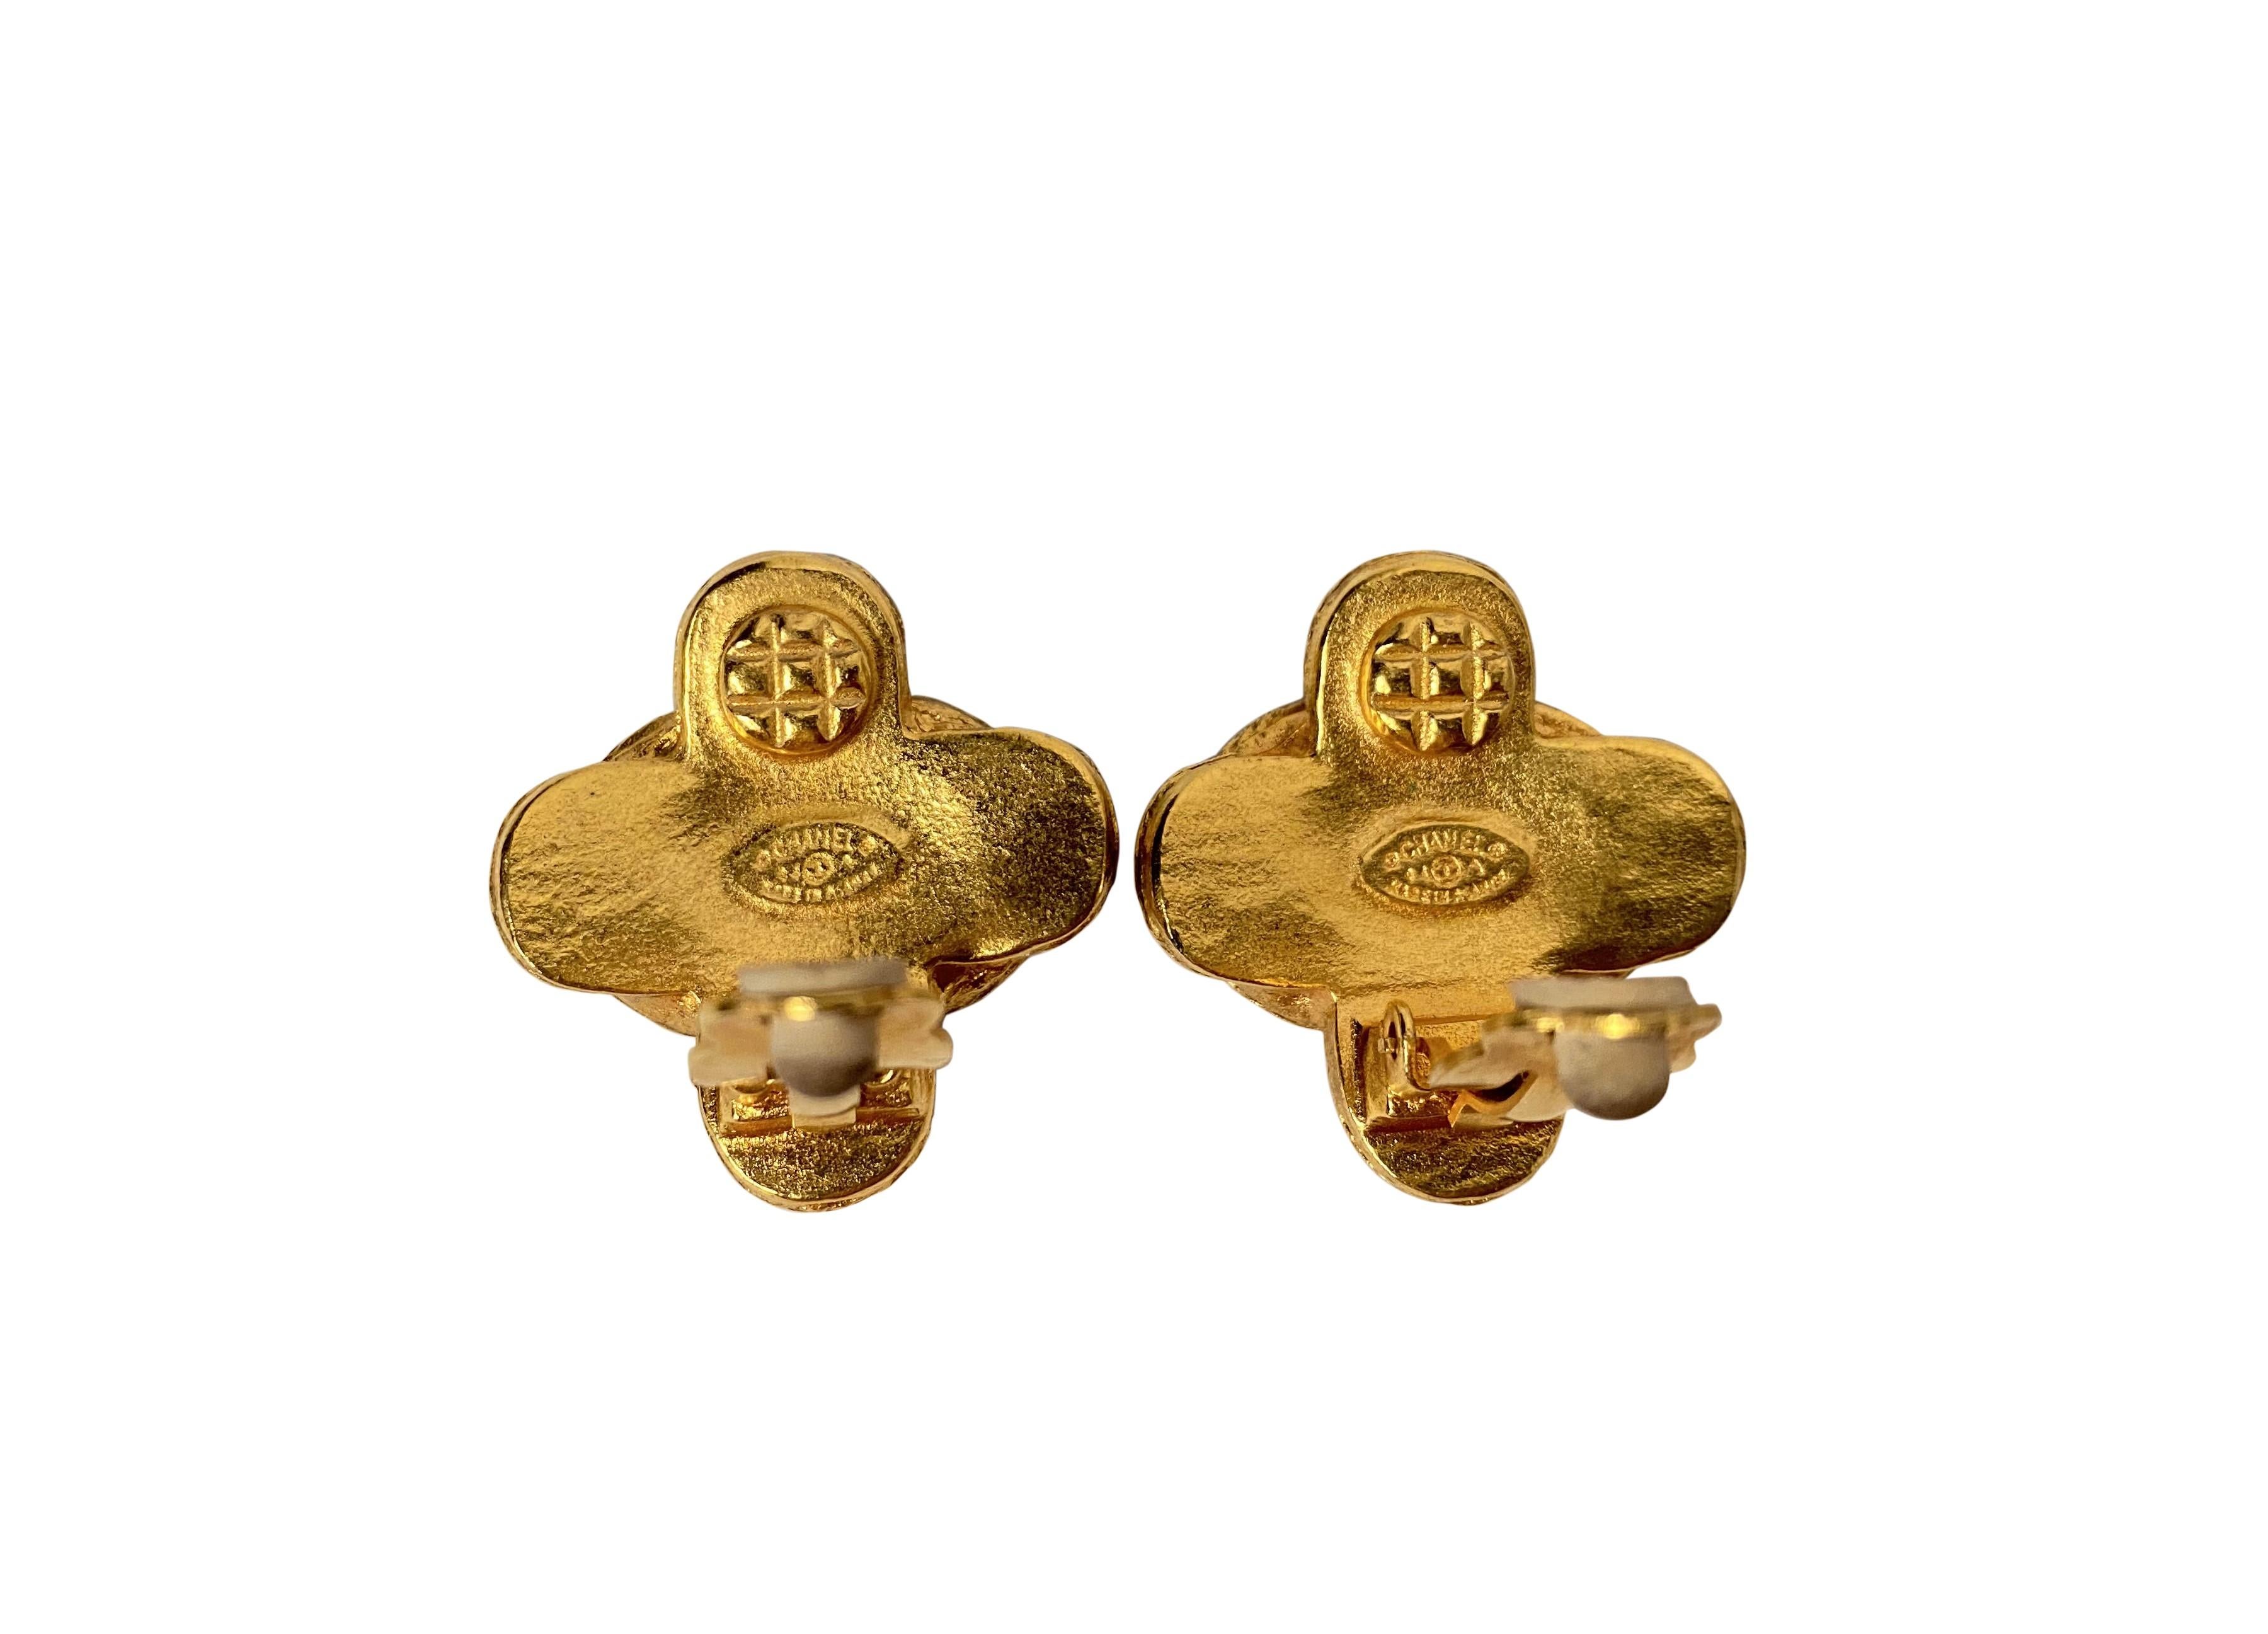 Vintage CHANEL Byzantine style cross clip on earrings from Autumn 1994.

Made in France